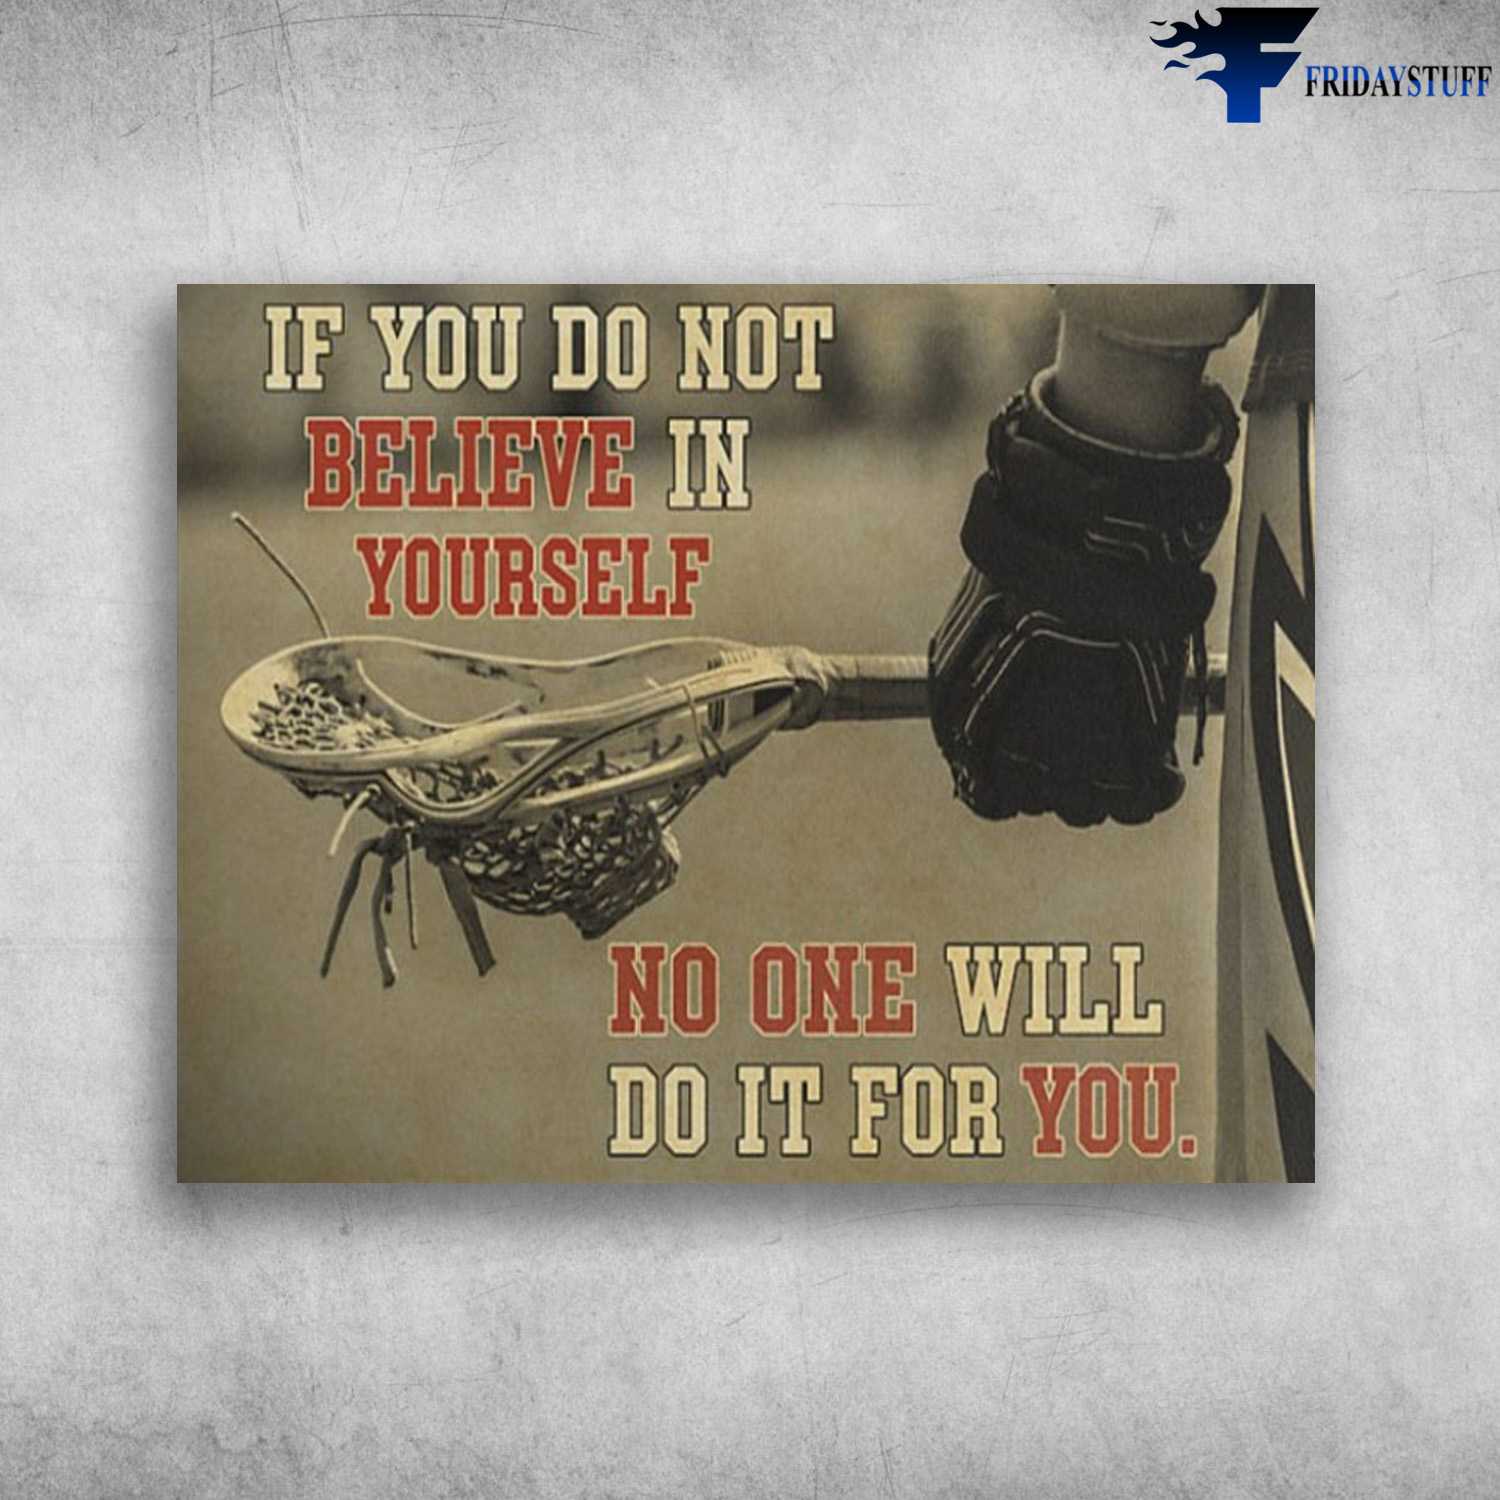 Lacrosse Poster, Lacrosse Decor, If You Do Not Believe In Yourself, No One Will Do It For You